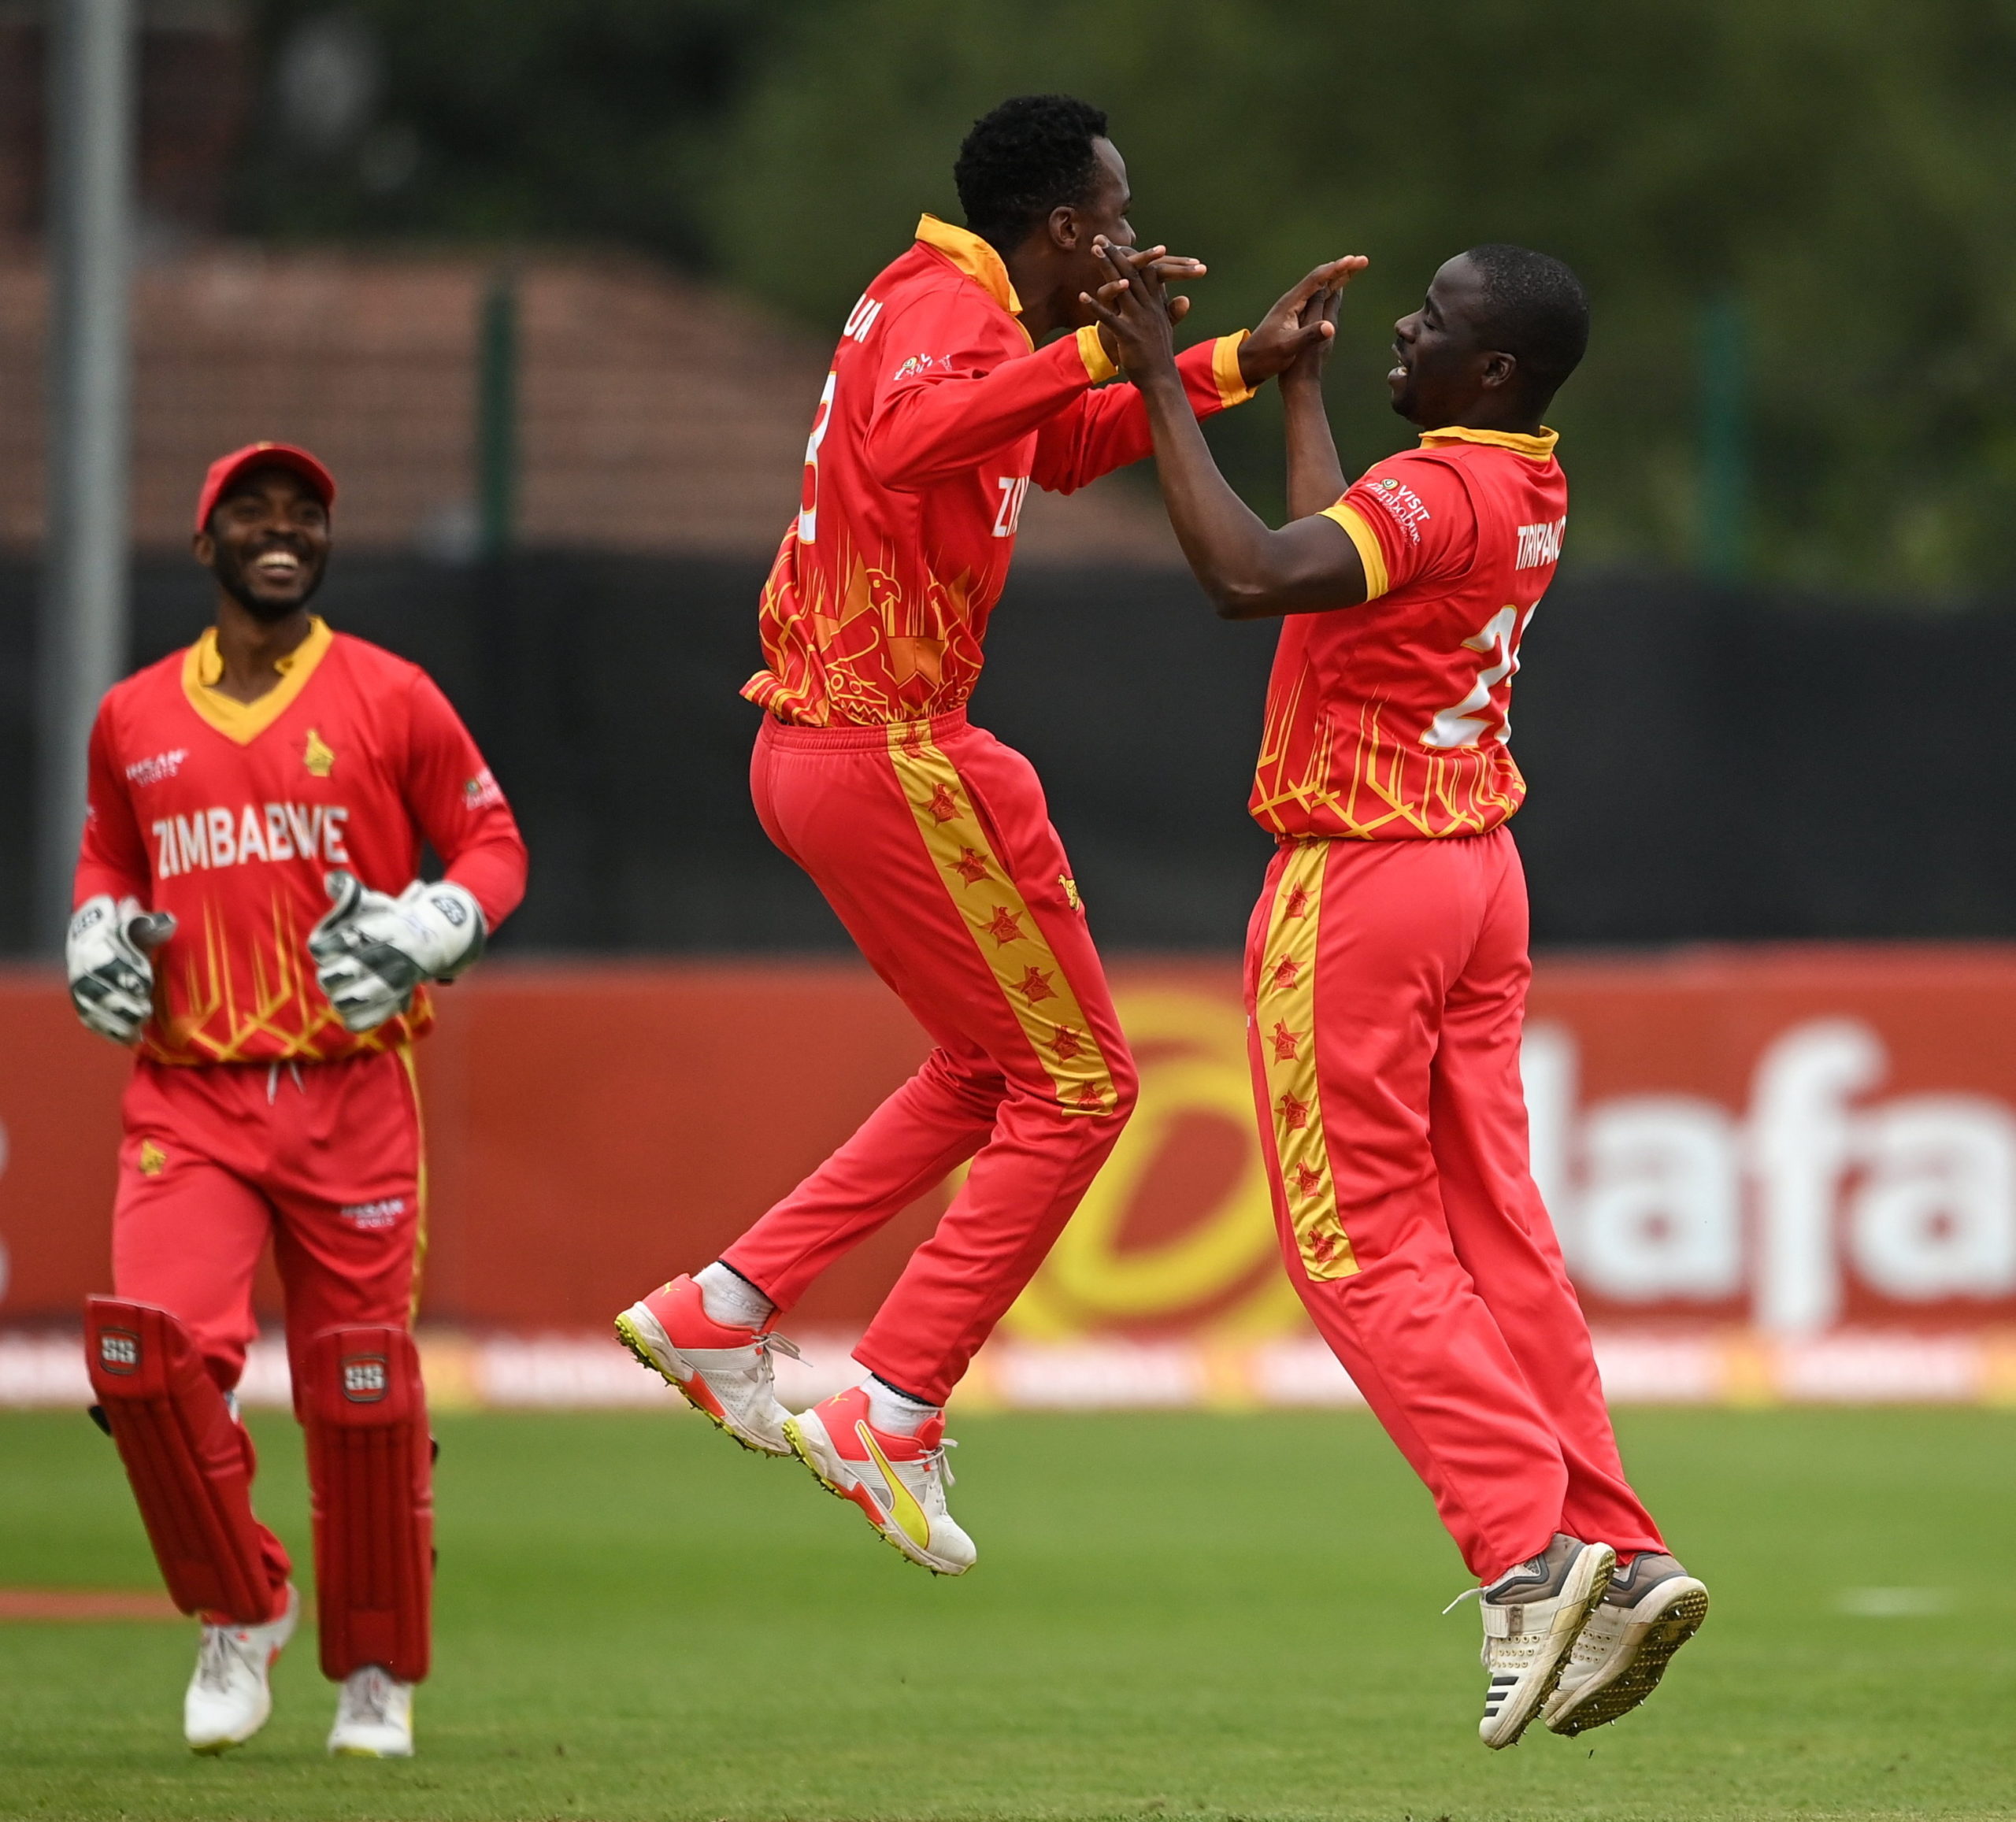 Zimbabwe edge Ireland in thriller to end T20I series on a high